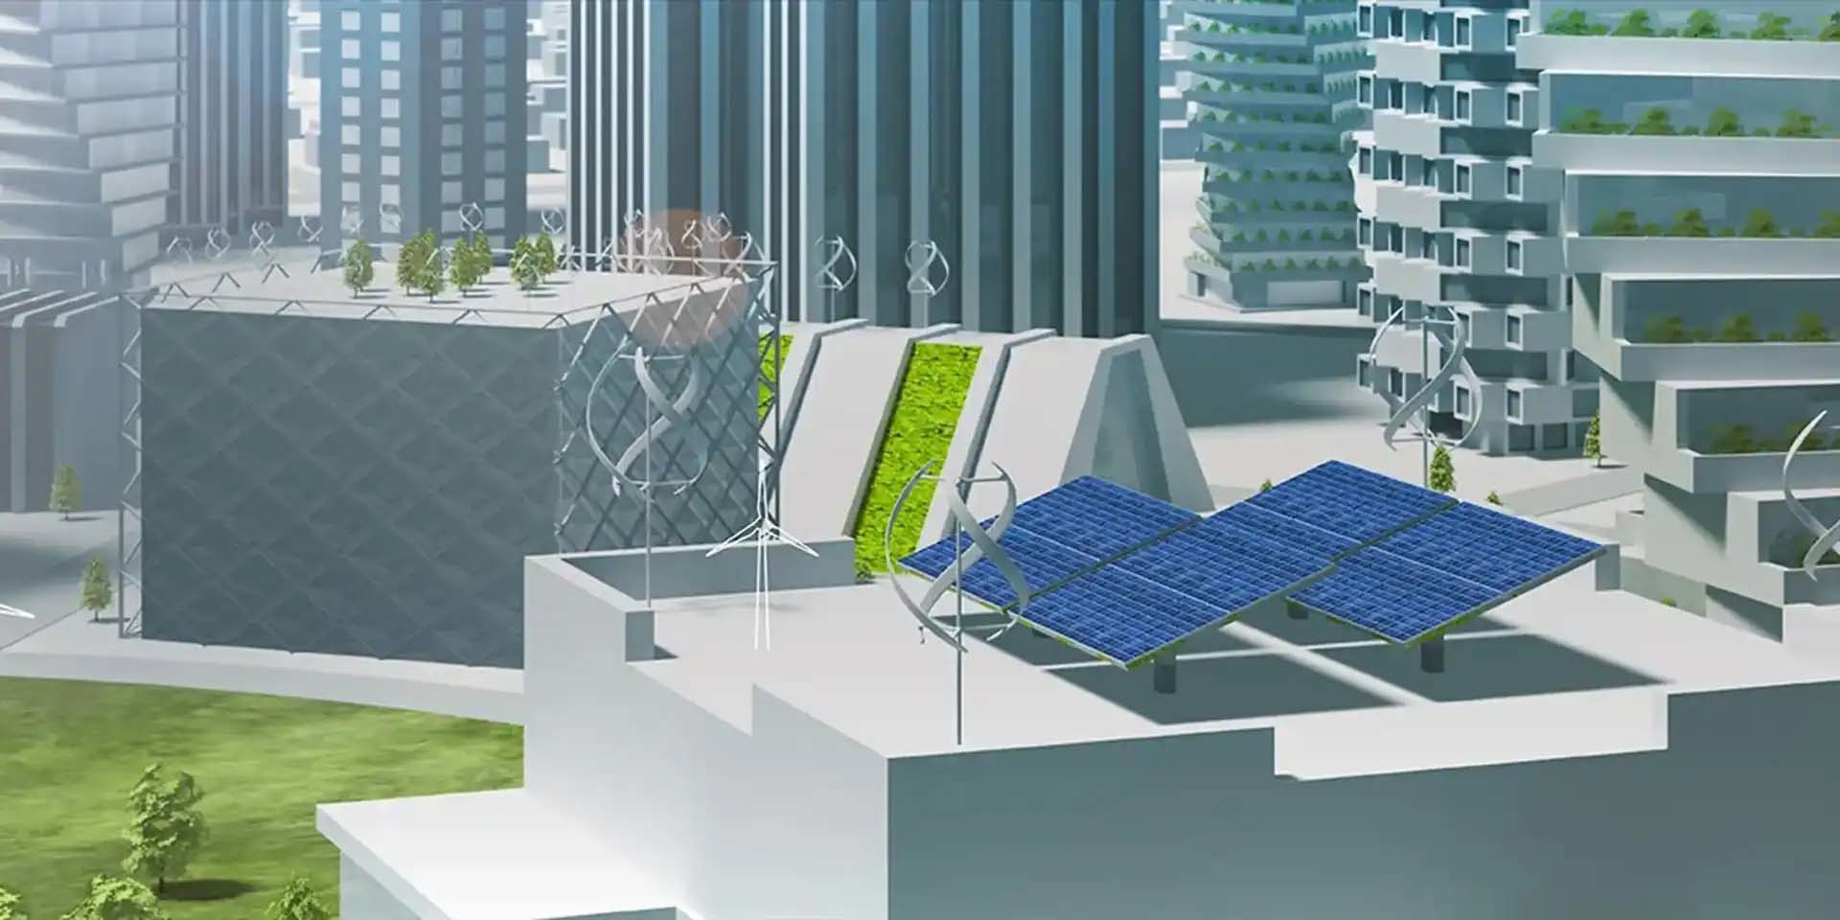 Shaping carbon neutral cities